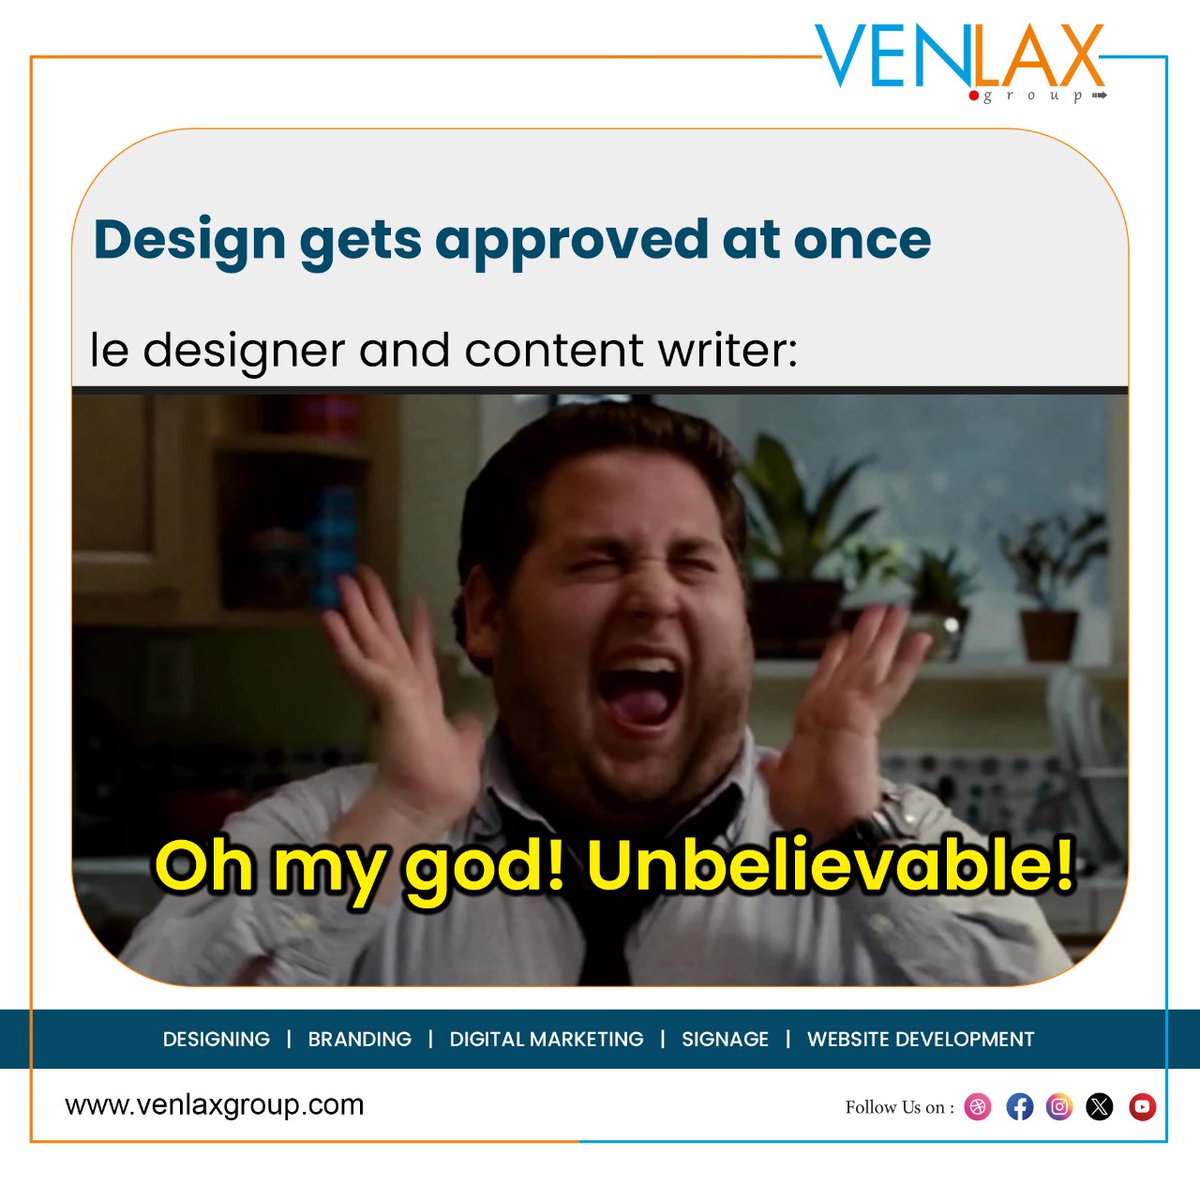 Wow! What an incredible moment! Our design gets approved on the first try! 🎉 Big shoutout to our amazing designer and content writer for their outstanding work!

#venlaxgroup #DesignApproved #FirstTry #TeamworkWins #CelebrationTime #DesignSuccess #ContentCreation #DesignerLife